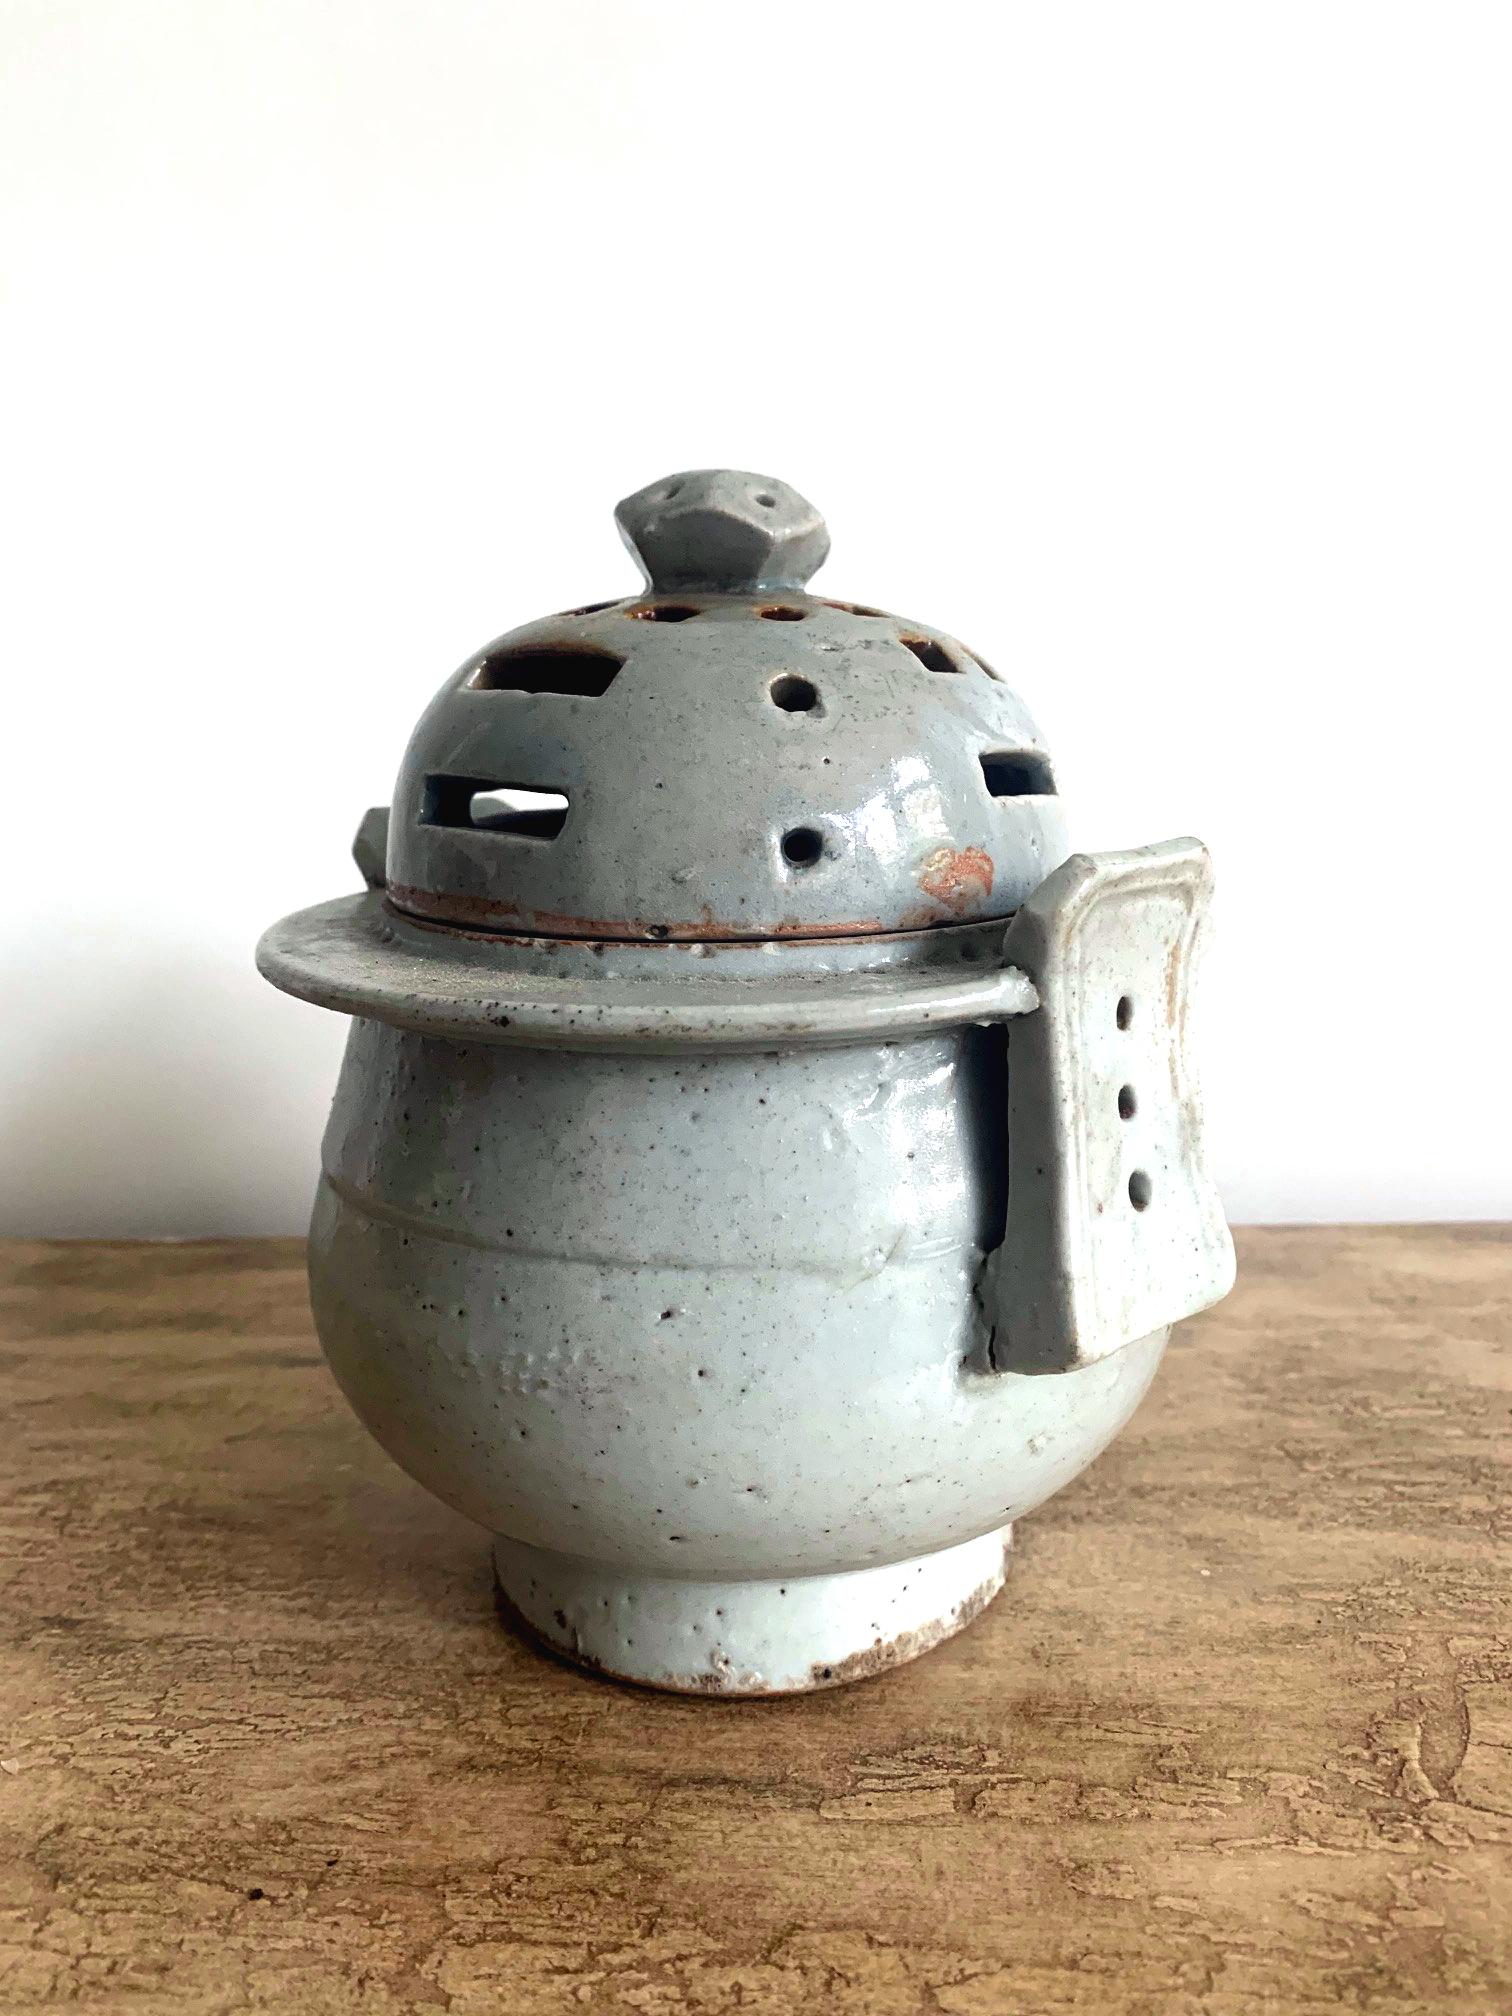 An antique Korean ritual incense burner circa 19th century, late Joseon dynasty. It was made in Bunwon Kiln in Gwangju, Gyeonggi Do, near Seoul. The ceramic container has a thickly body with white bluish celadon glaze. It is of an archaic Chinese